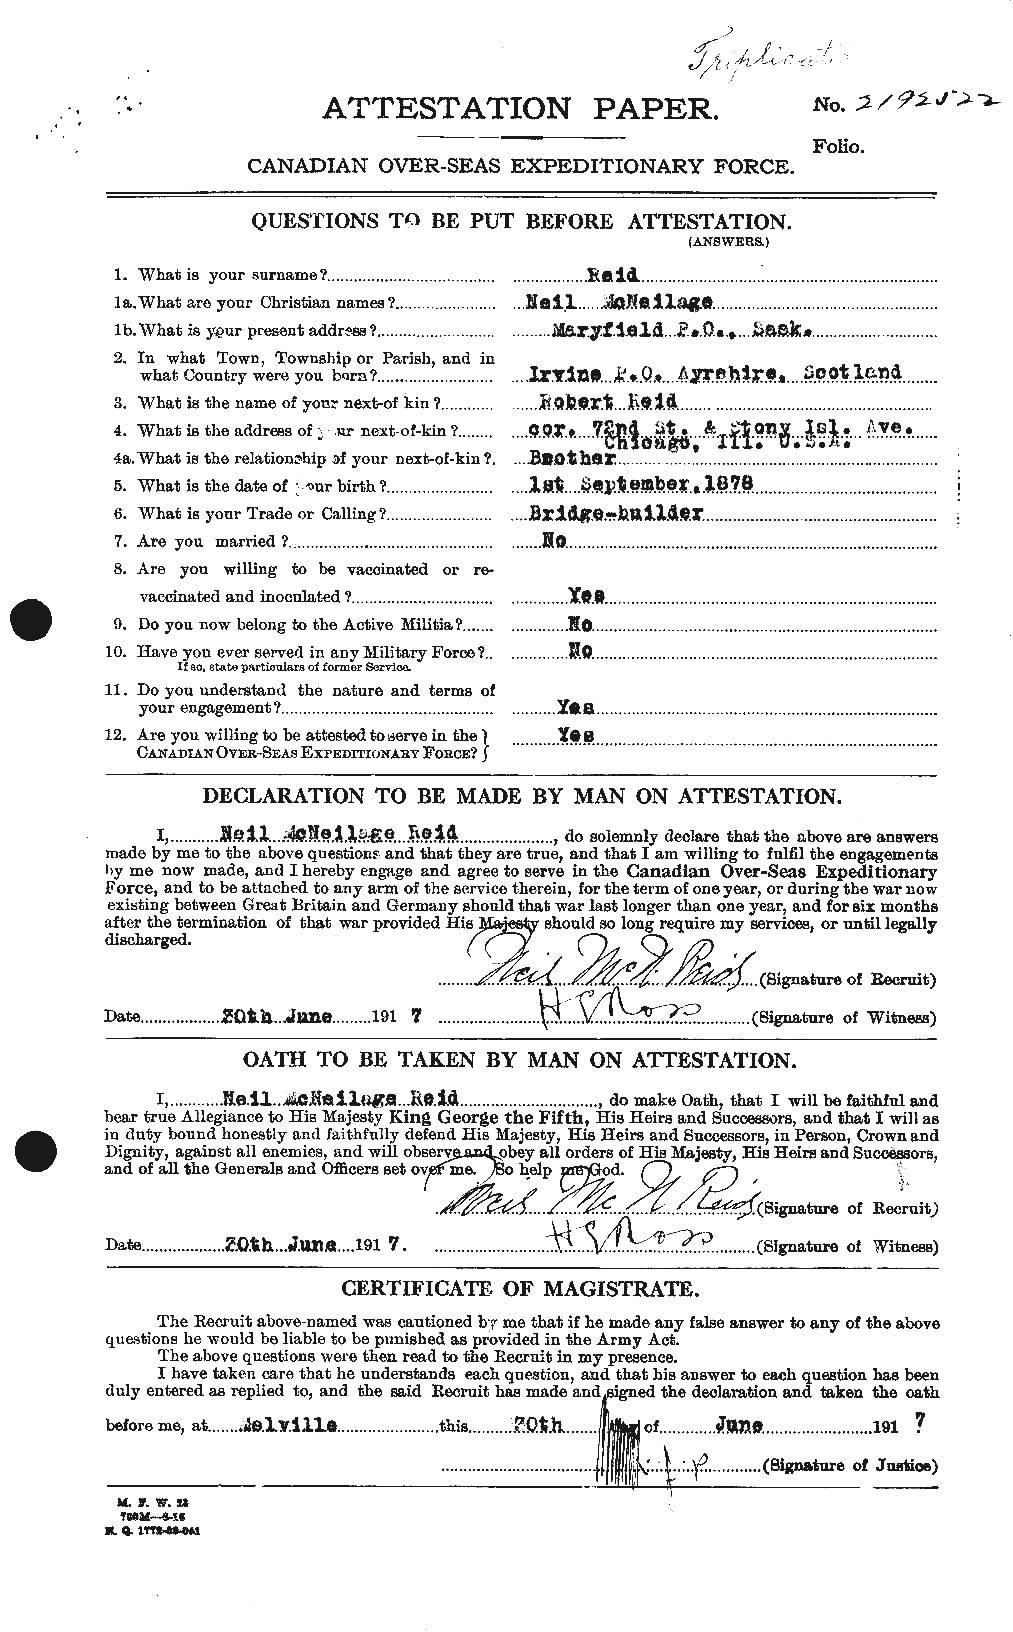 Personnel Records of the First World War - CEF 598960a